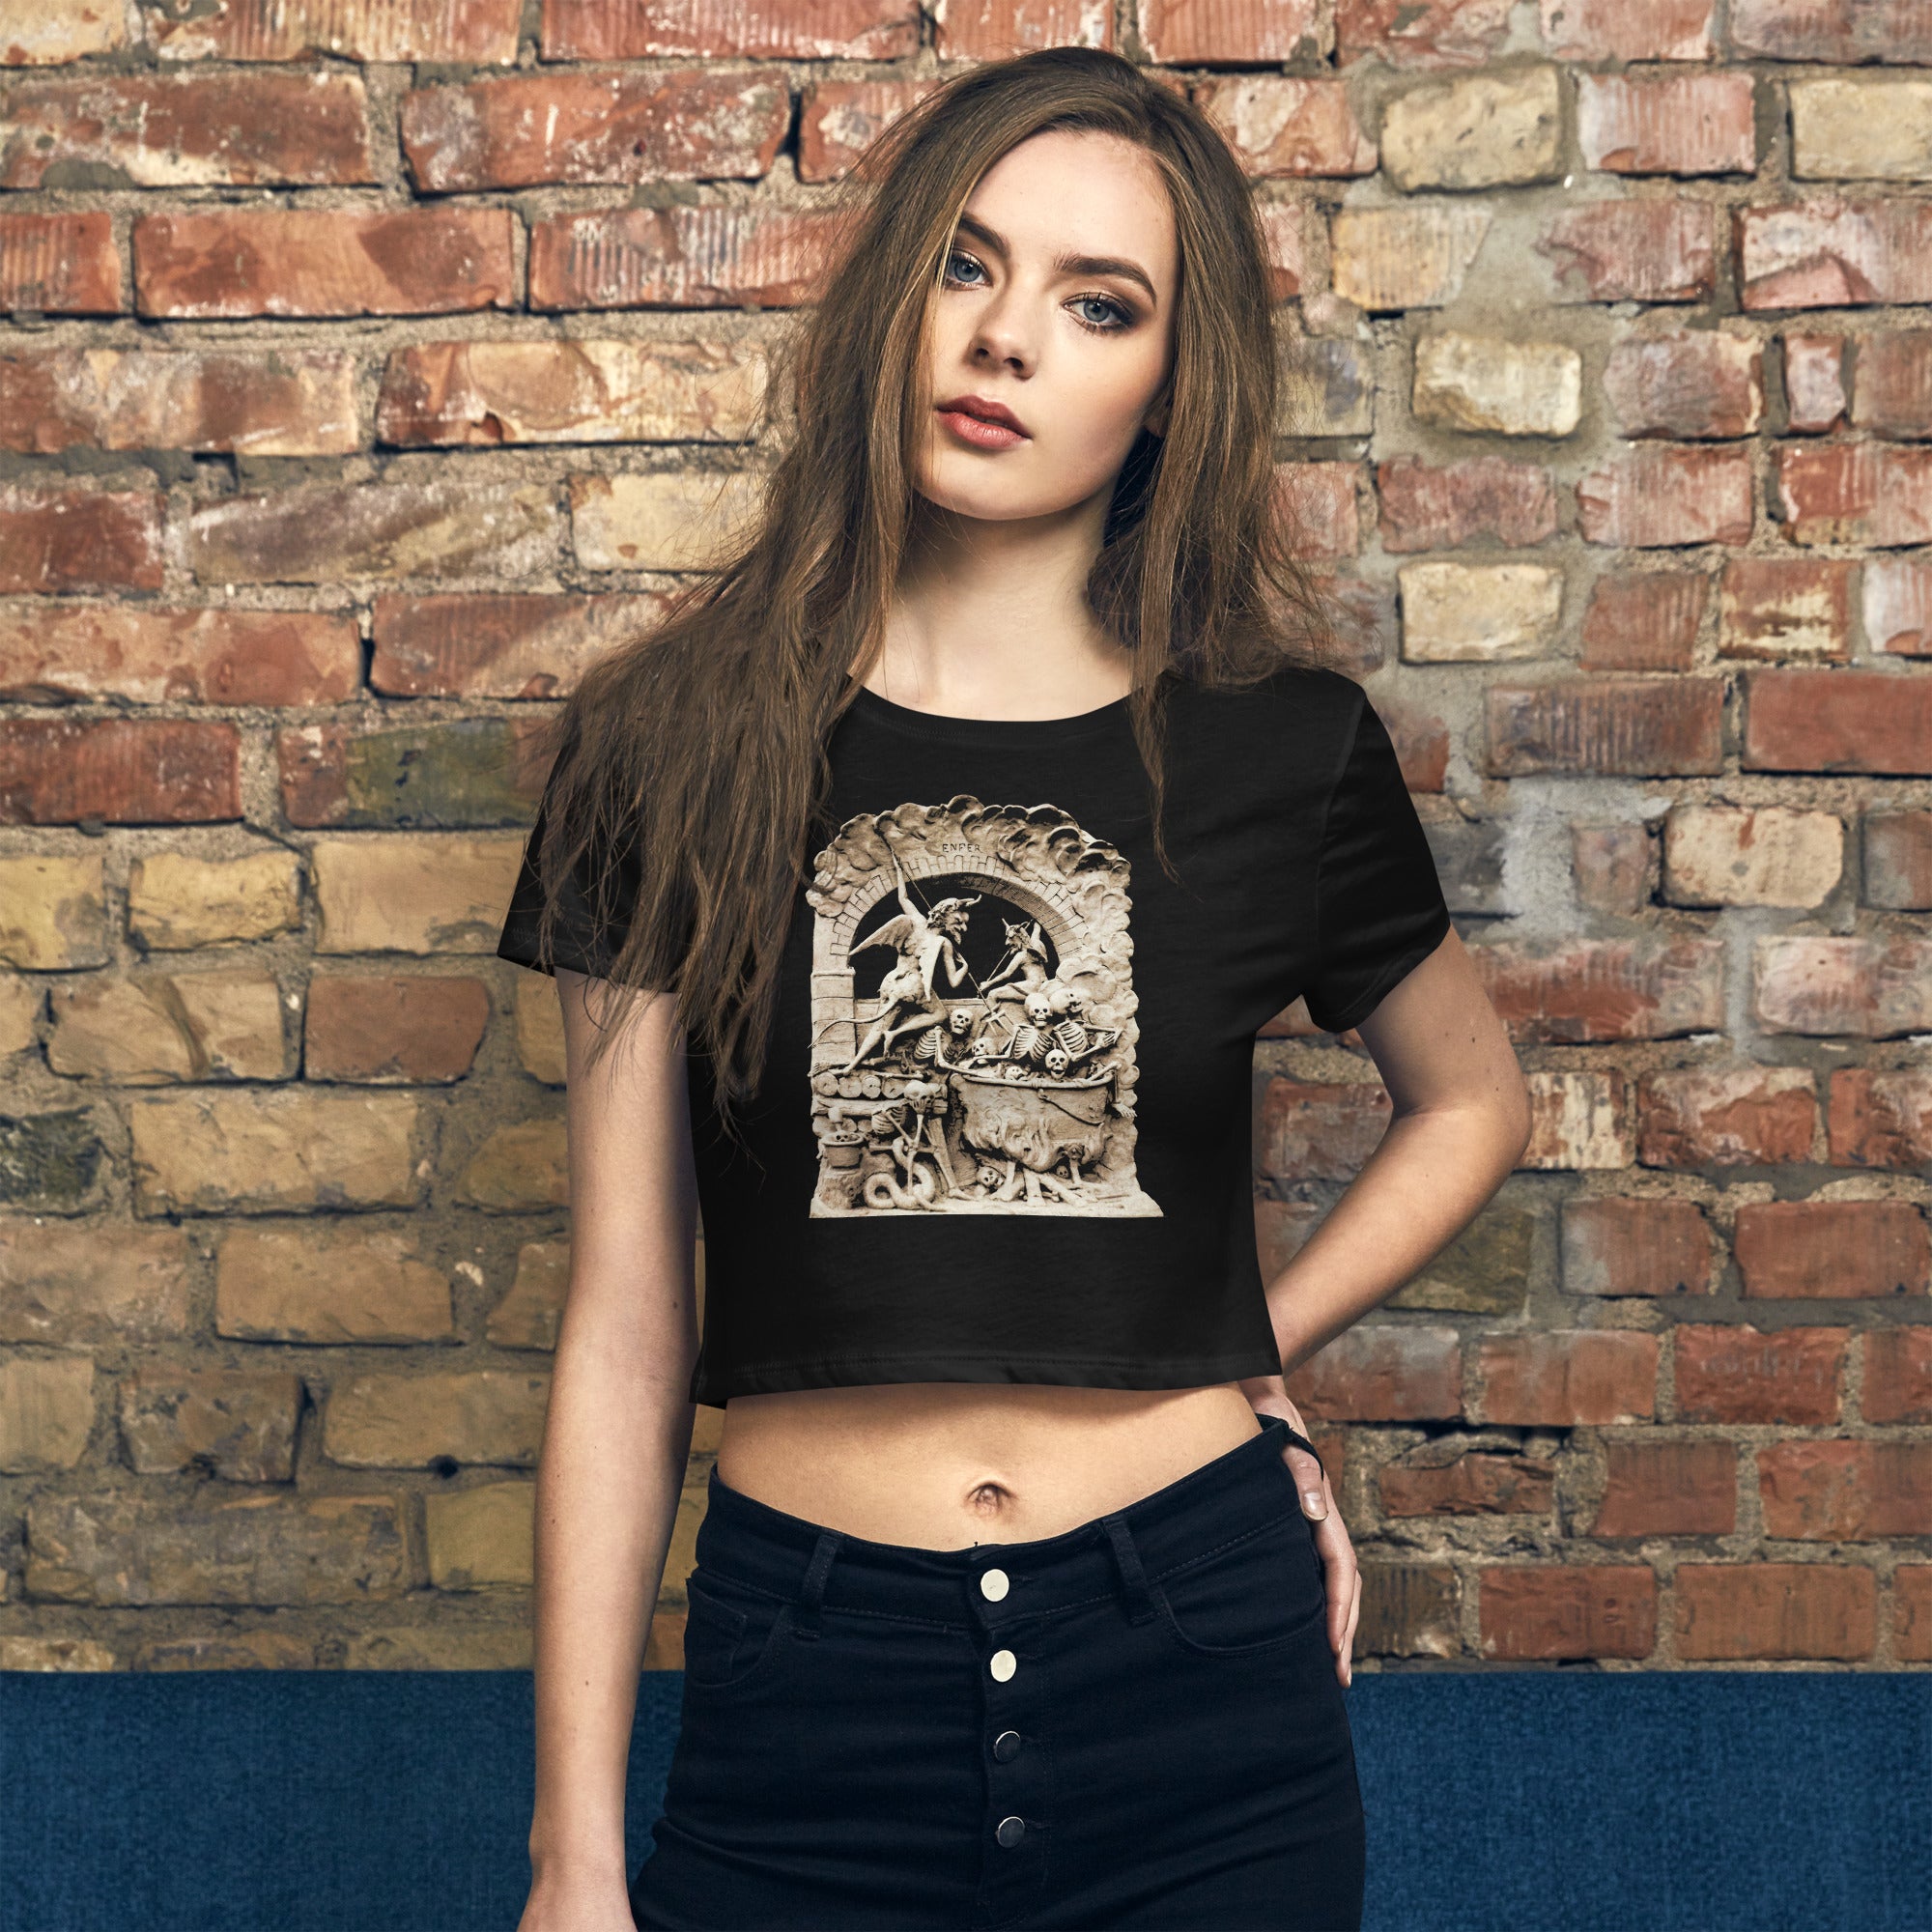 Les Diableries The Pits of Hell and the Devil Women’s Crop Tee - Edge of Life Designs